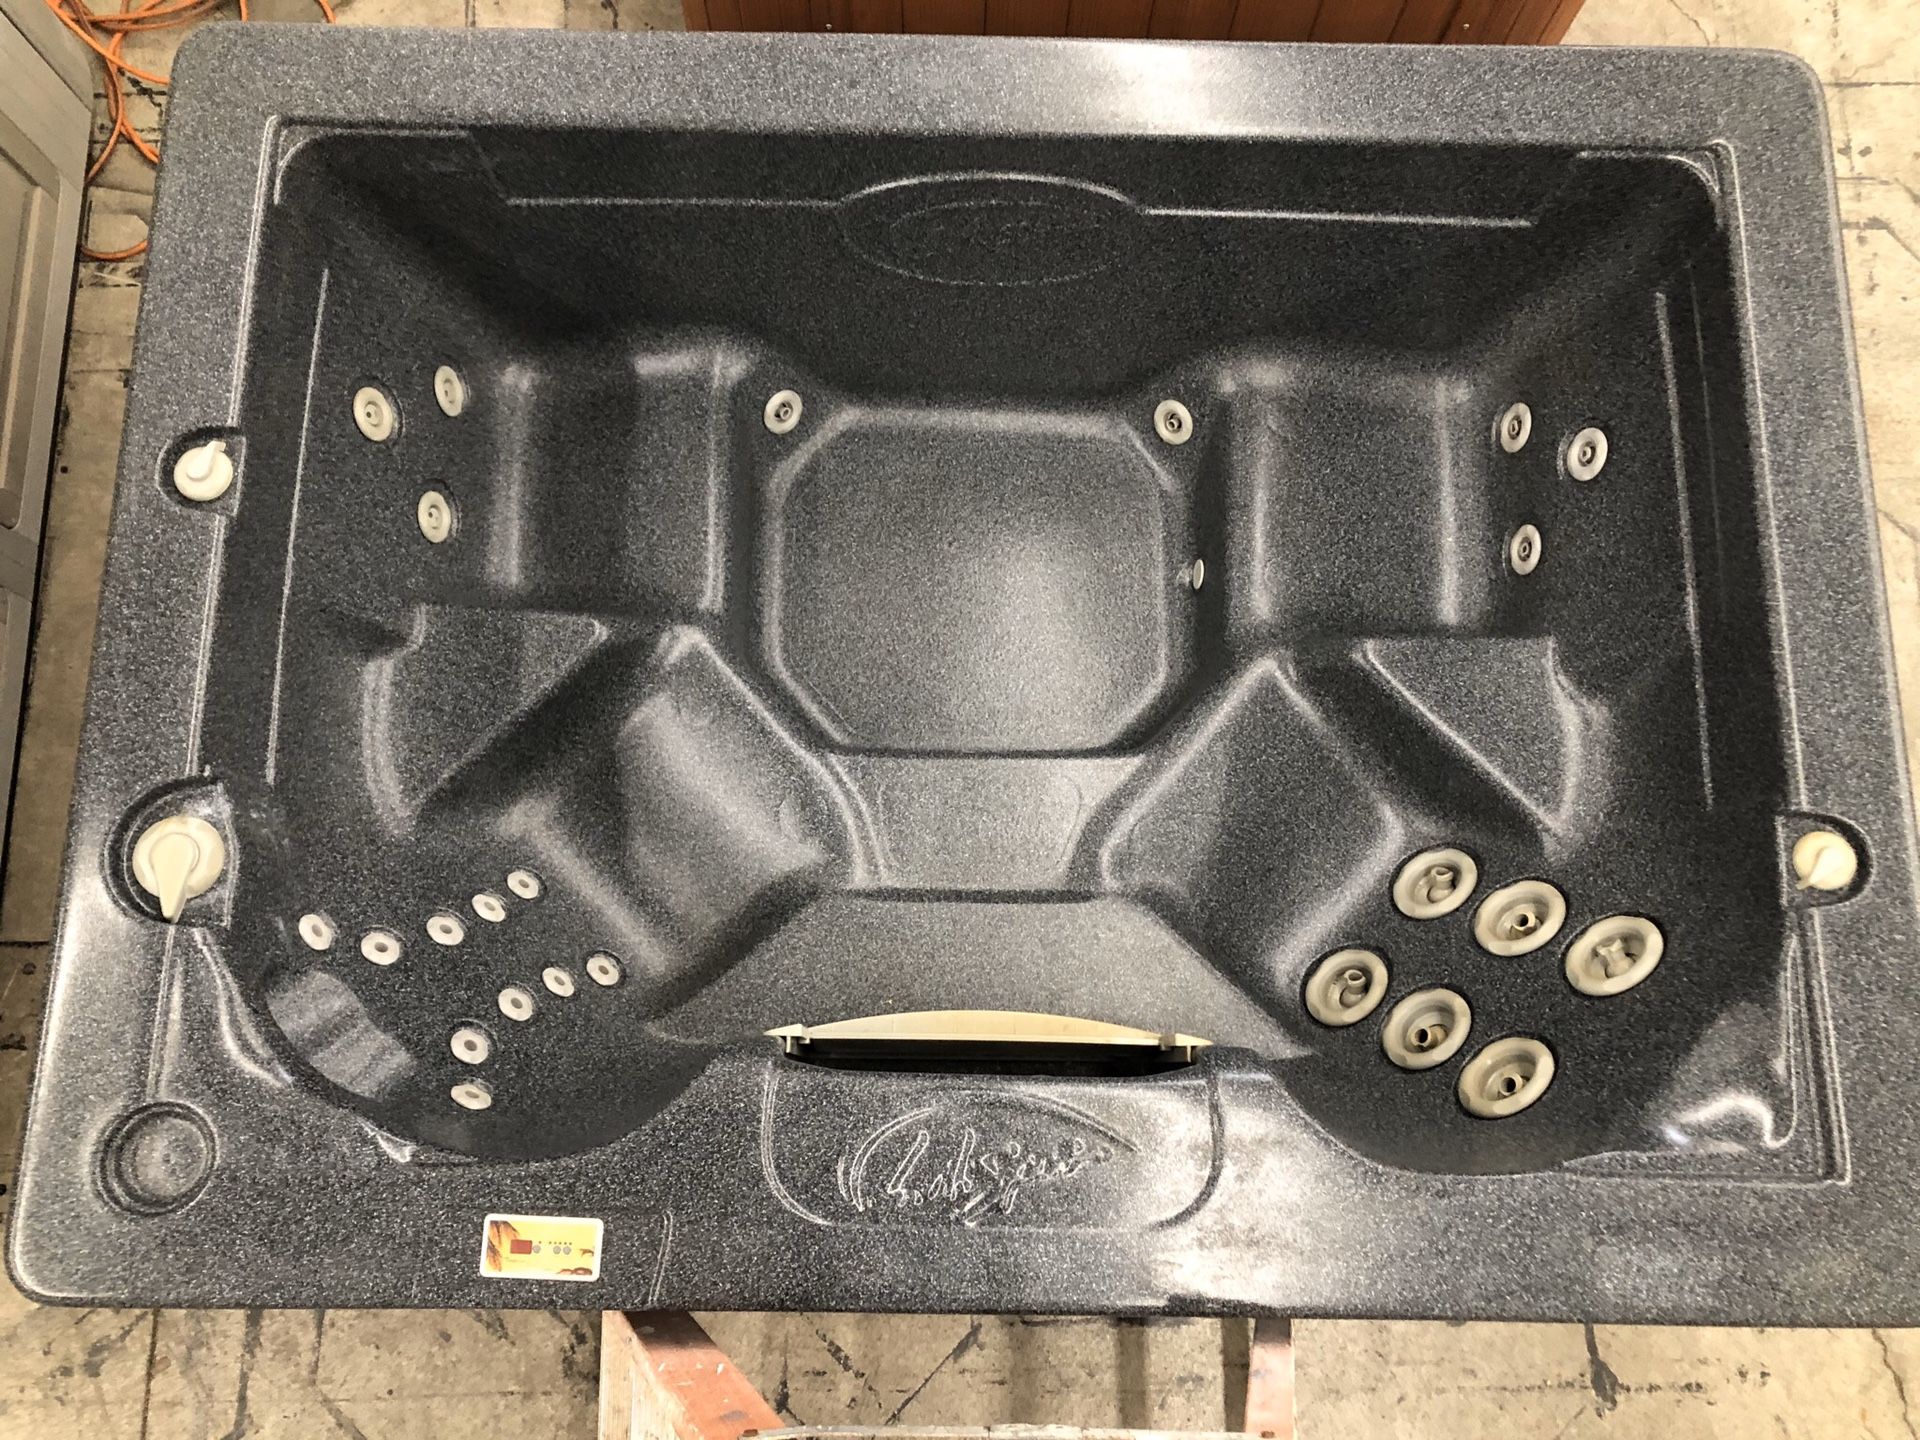 L.A. Spas 5x7 open seated 110v plug in hot tub